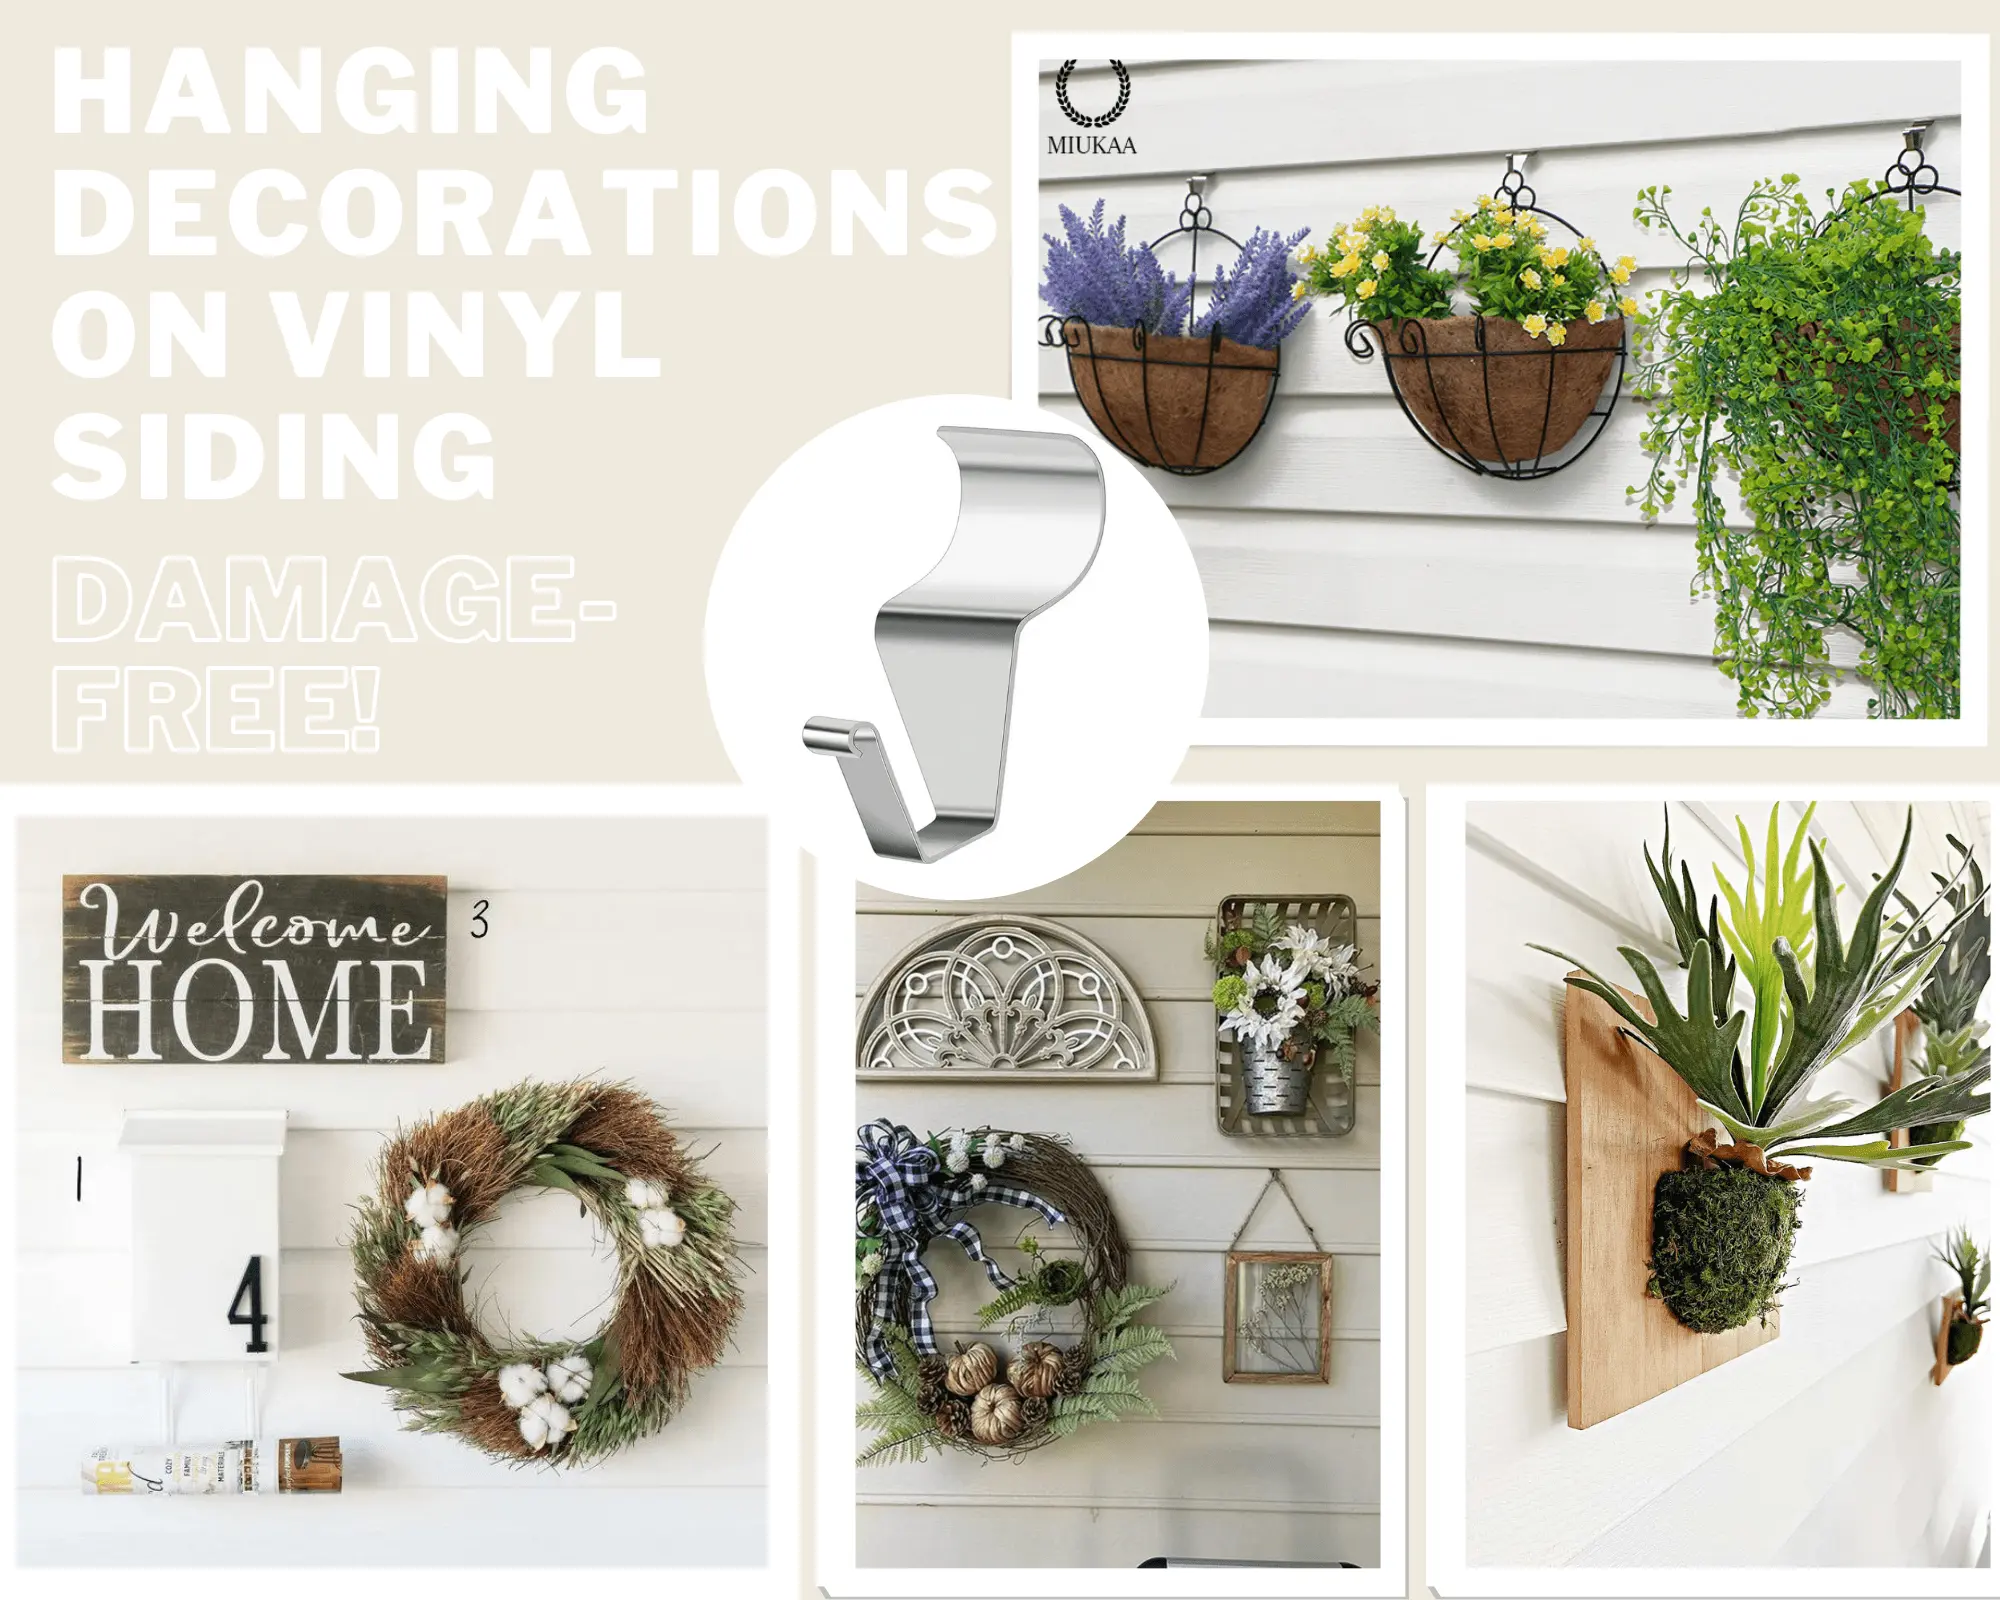 how do you hang decorations on vinyl siding